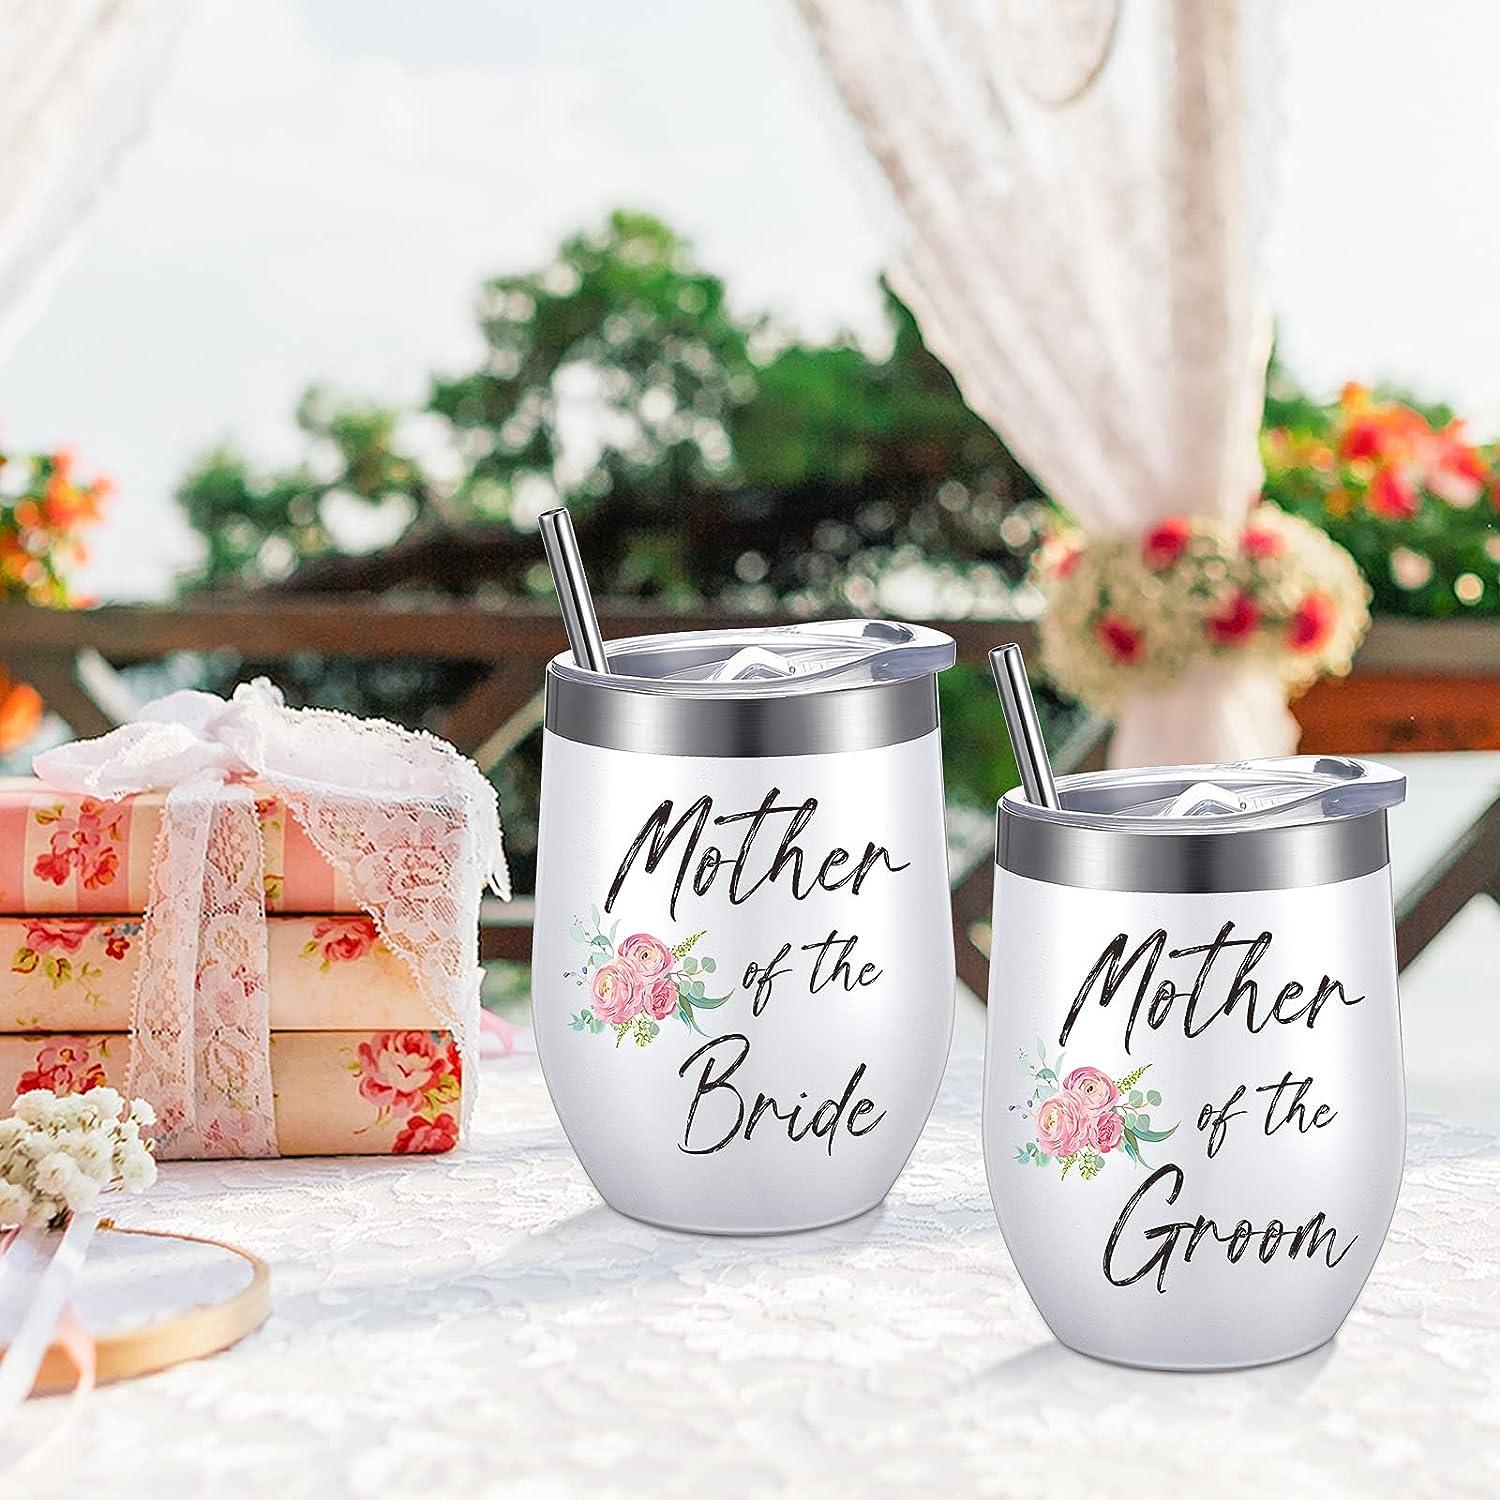 Top Unique Wedding Gift Ideas in Singapore for Couples: Perfect Gifts for  the Bride and Groom